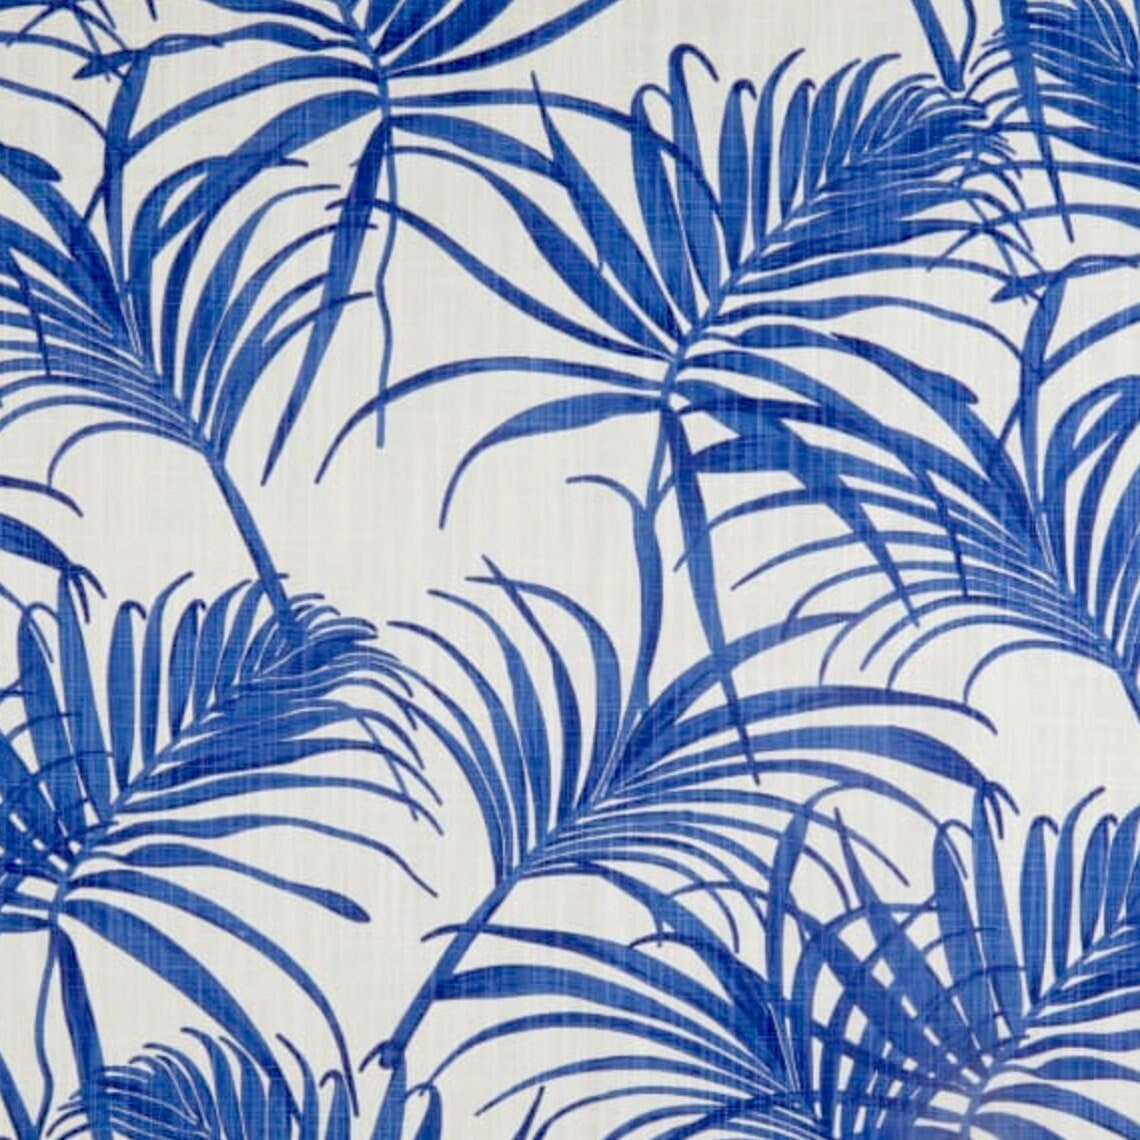 duvet cover in karoo commodore blue watercolor tropical foliage